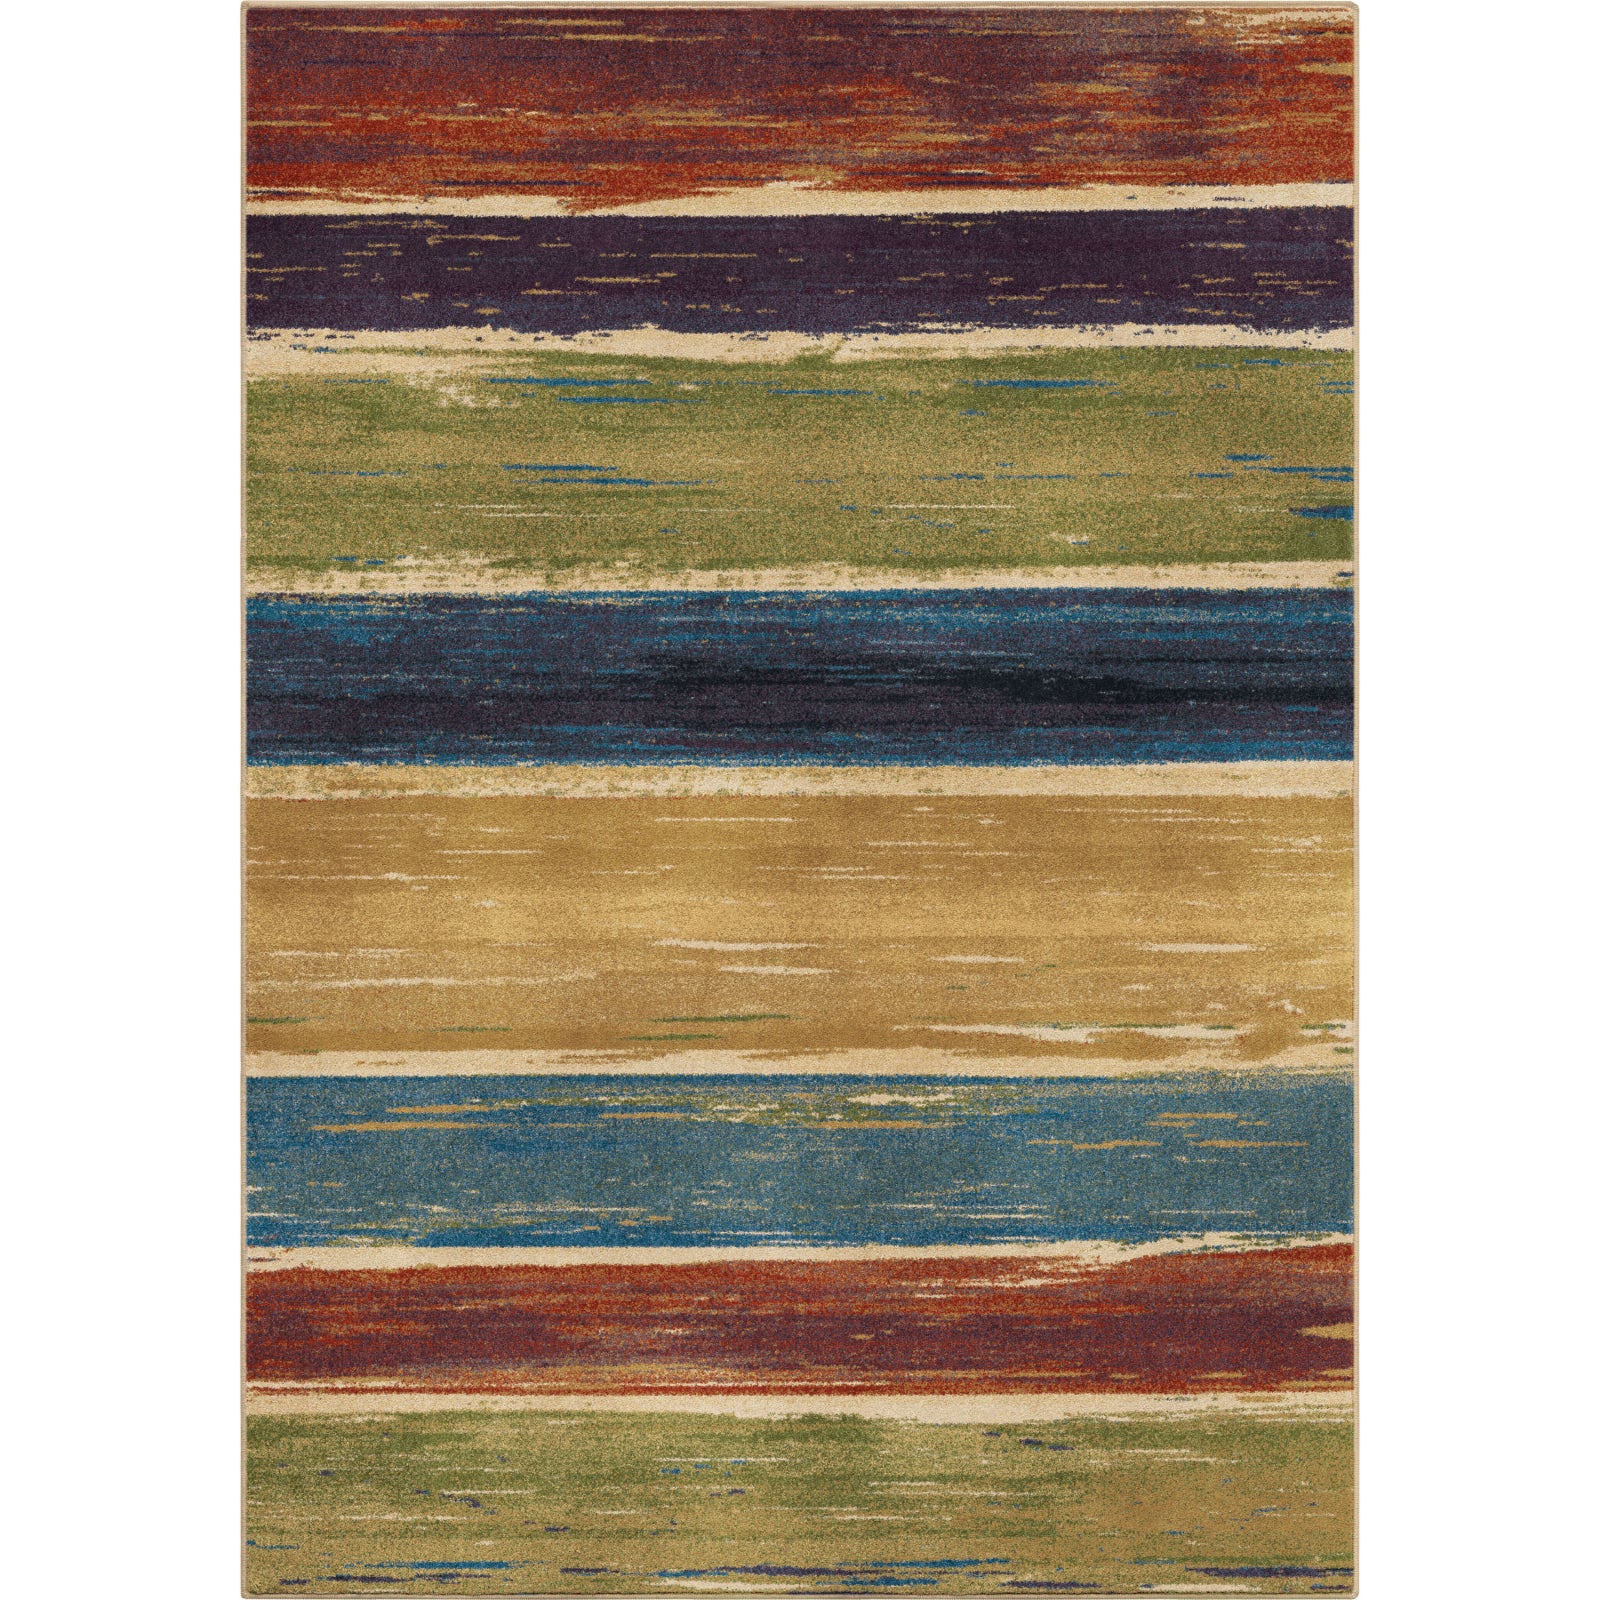 Orian Rugs Berkley Stretched Lines Multi Area Rug main image